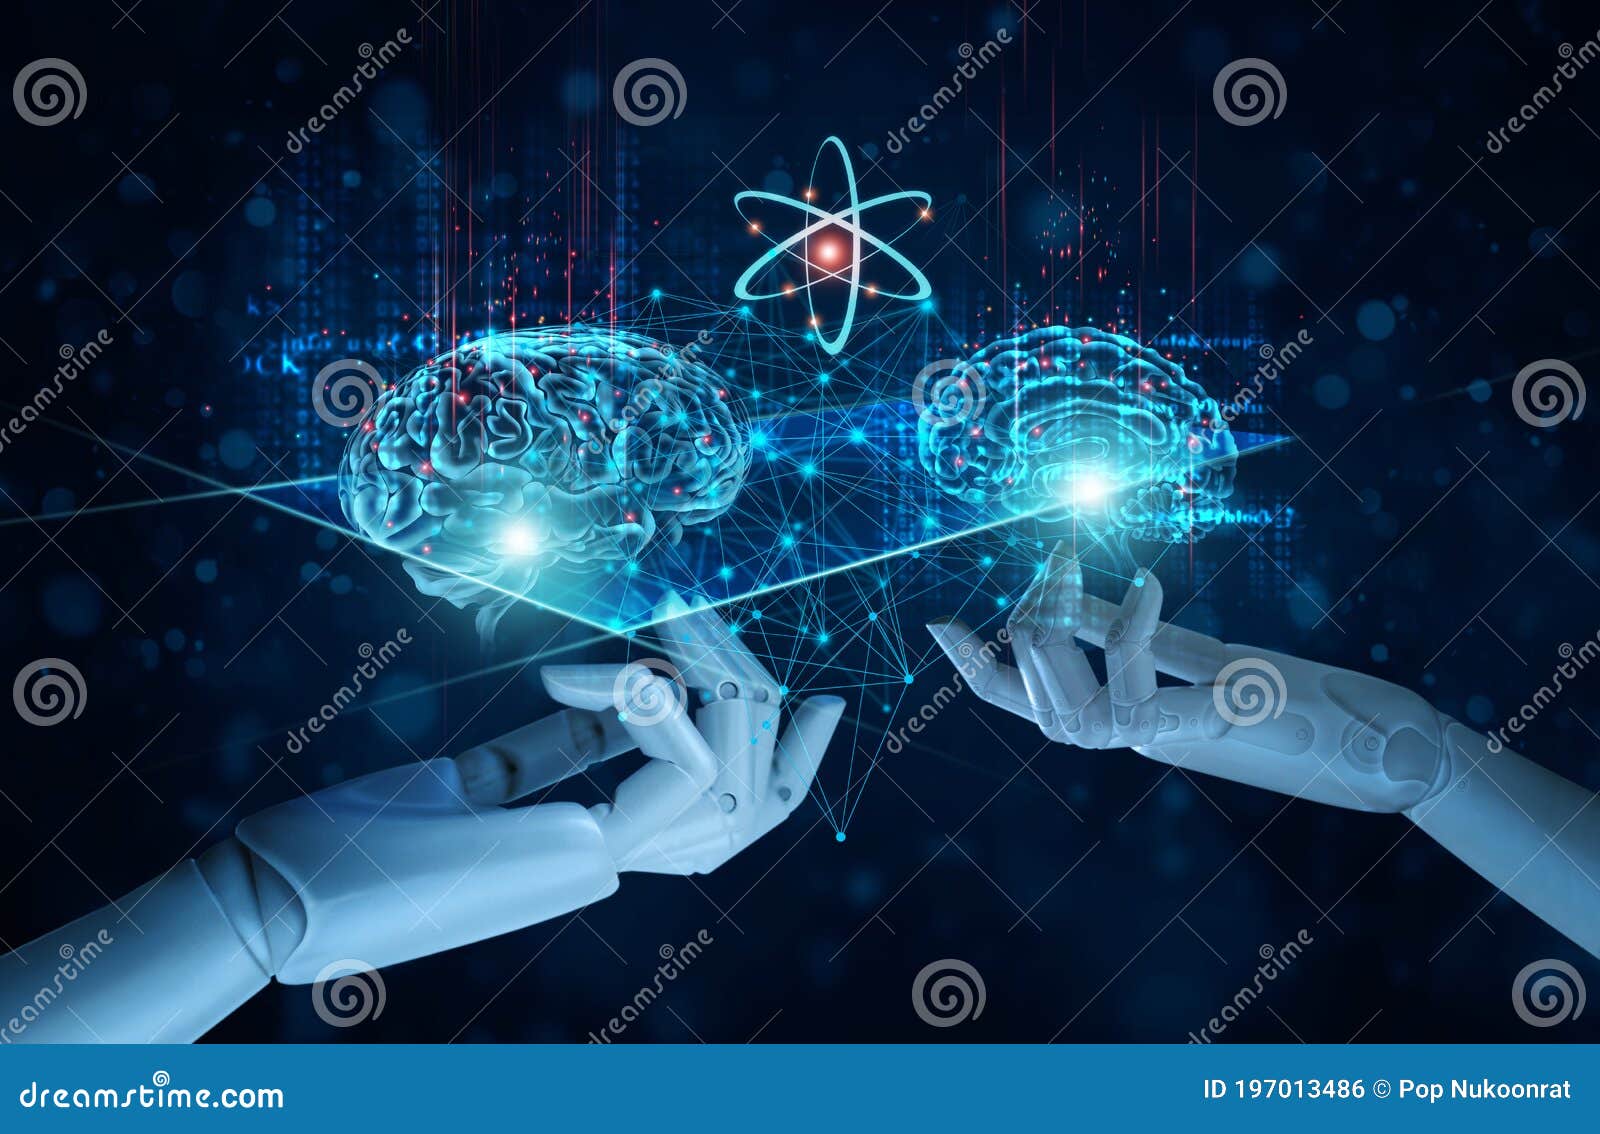 hands of artificial intelligence ai touching a brains, ic, machine learning, of futuristic technology. big data, science